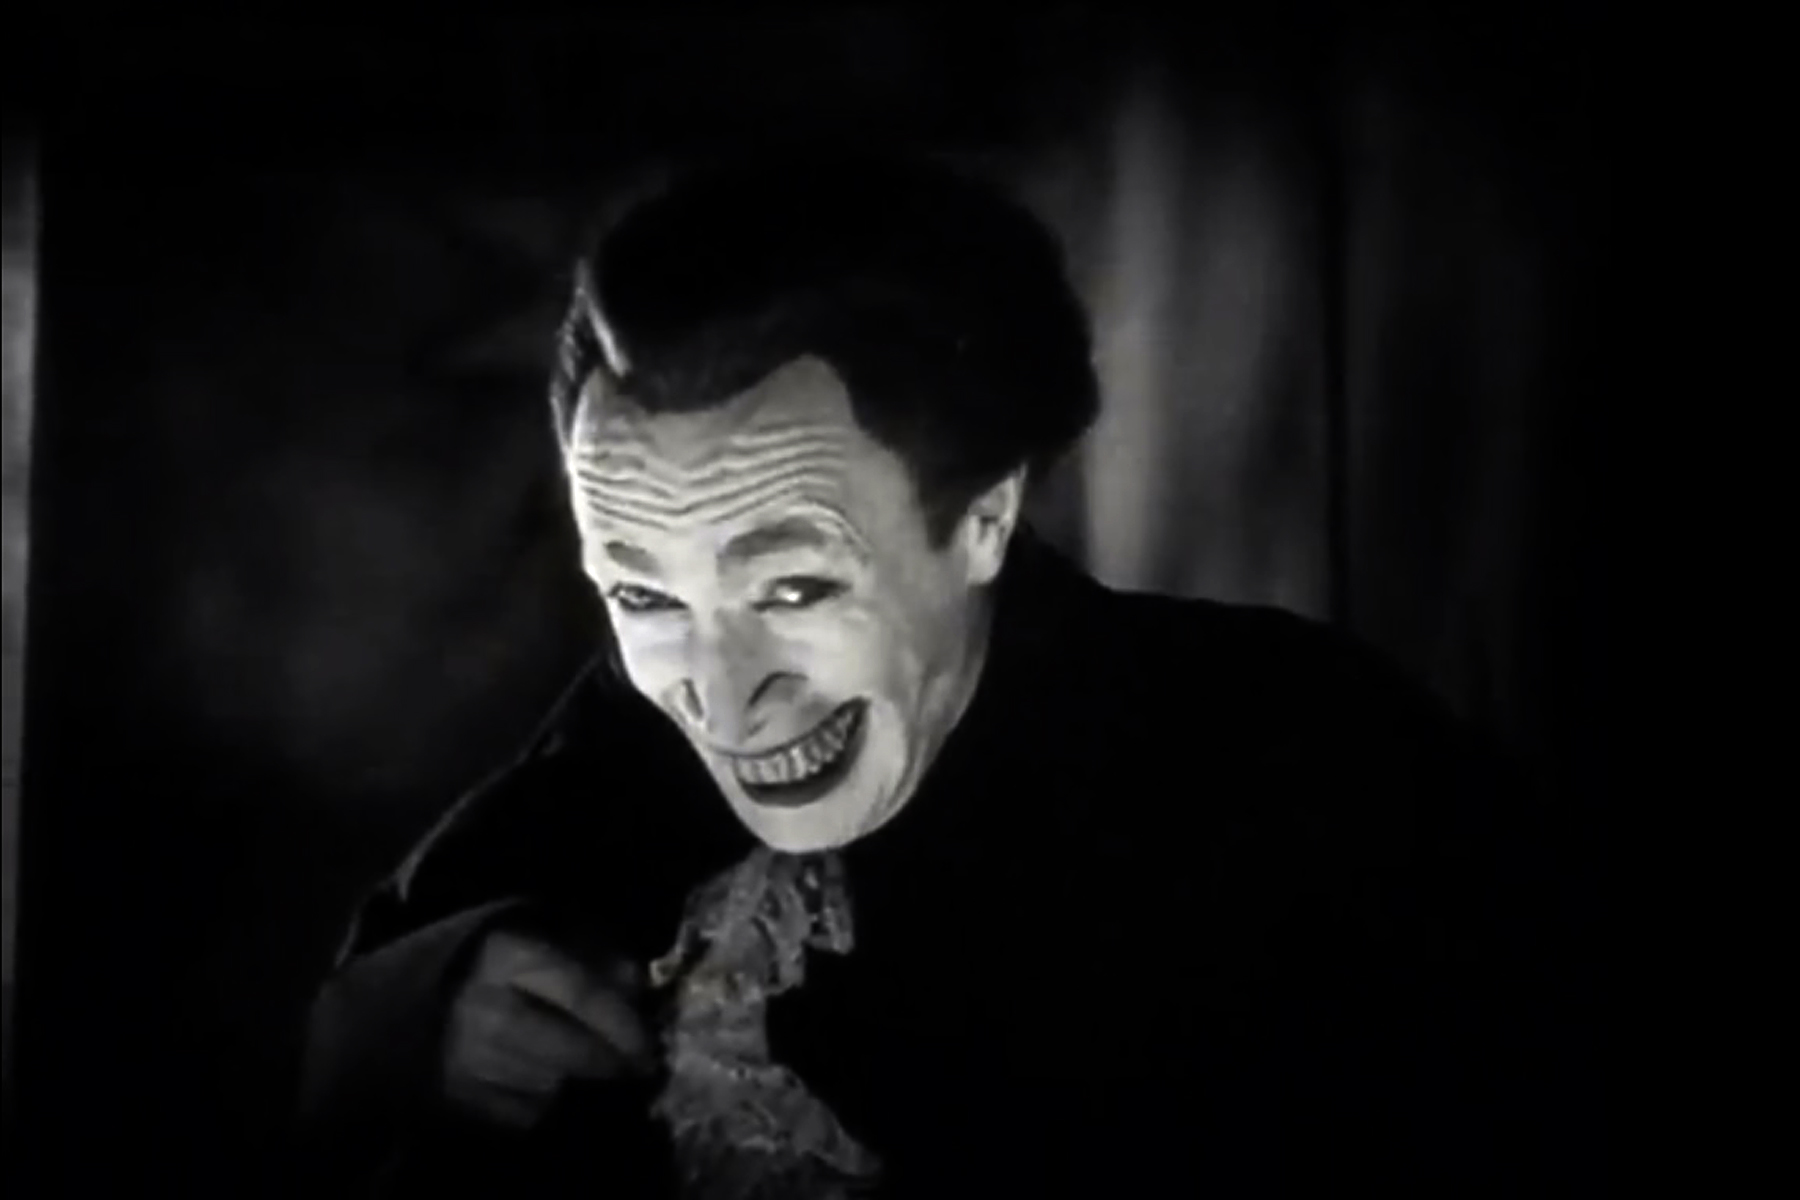 Man Who Laughs